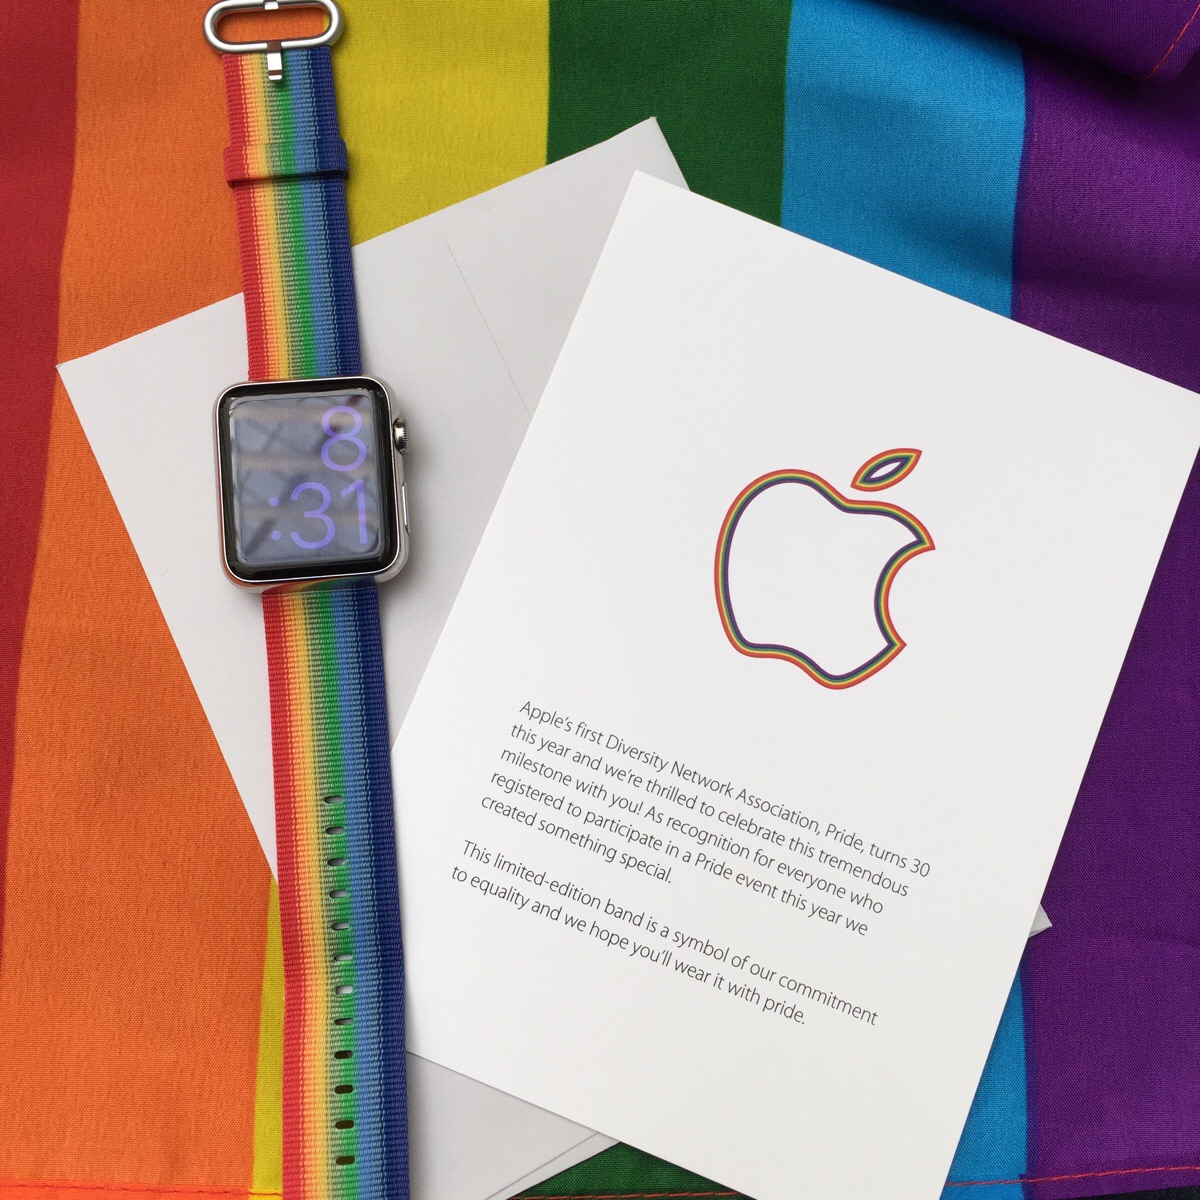 Apple Creates Limited Edition Apple Watch Band for Pride 2016